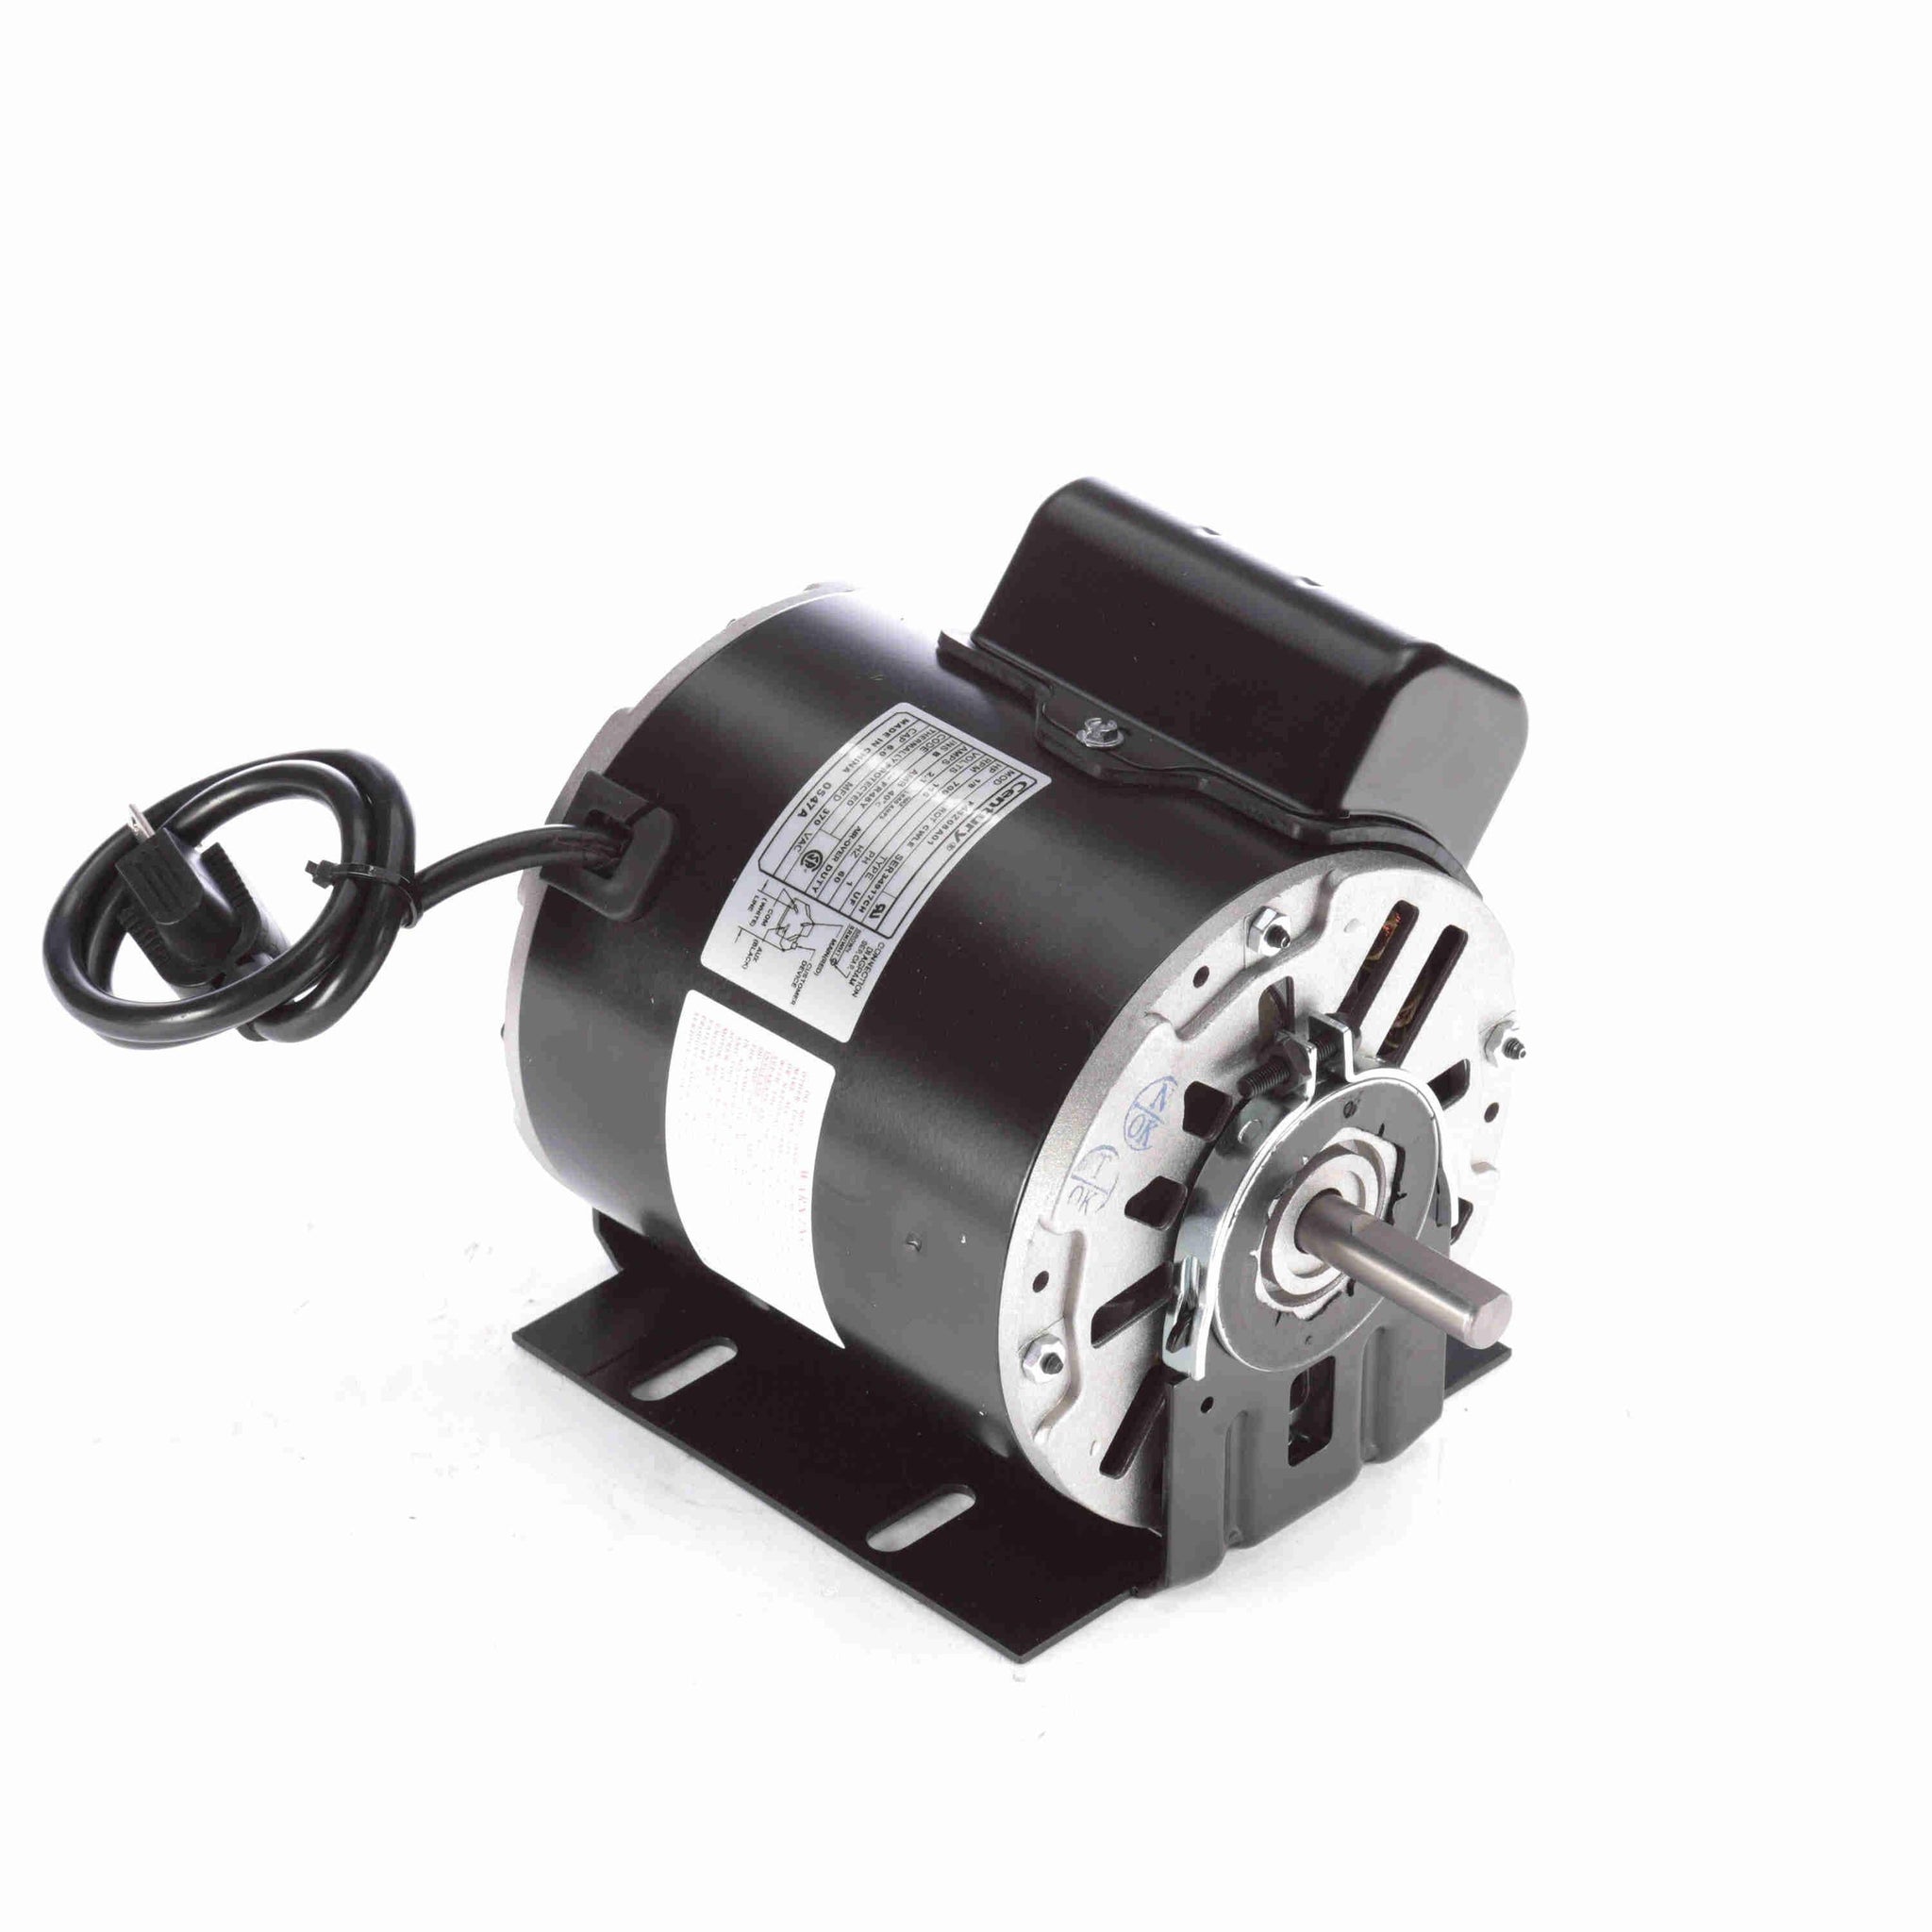 0547A -  1/8 HP OEM Replacement Motor, 700 RPM, 115 Volts, 48 Frame, Semi Enclosed - Hardware & Moreee